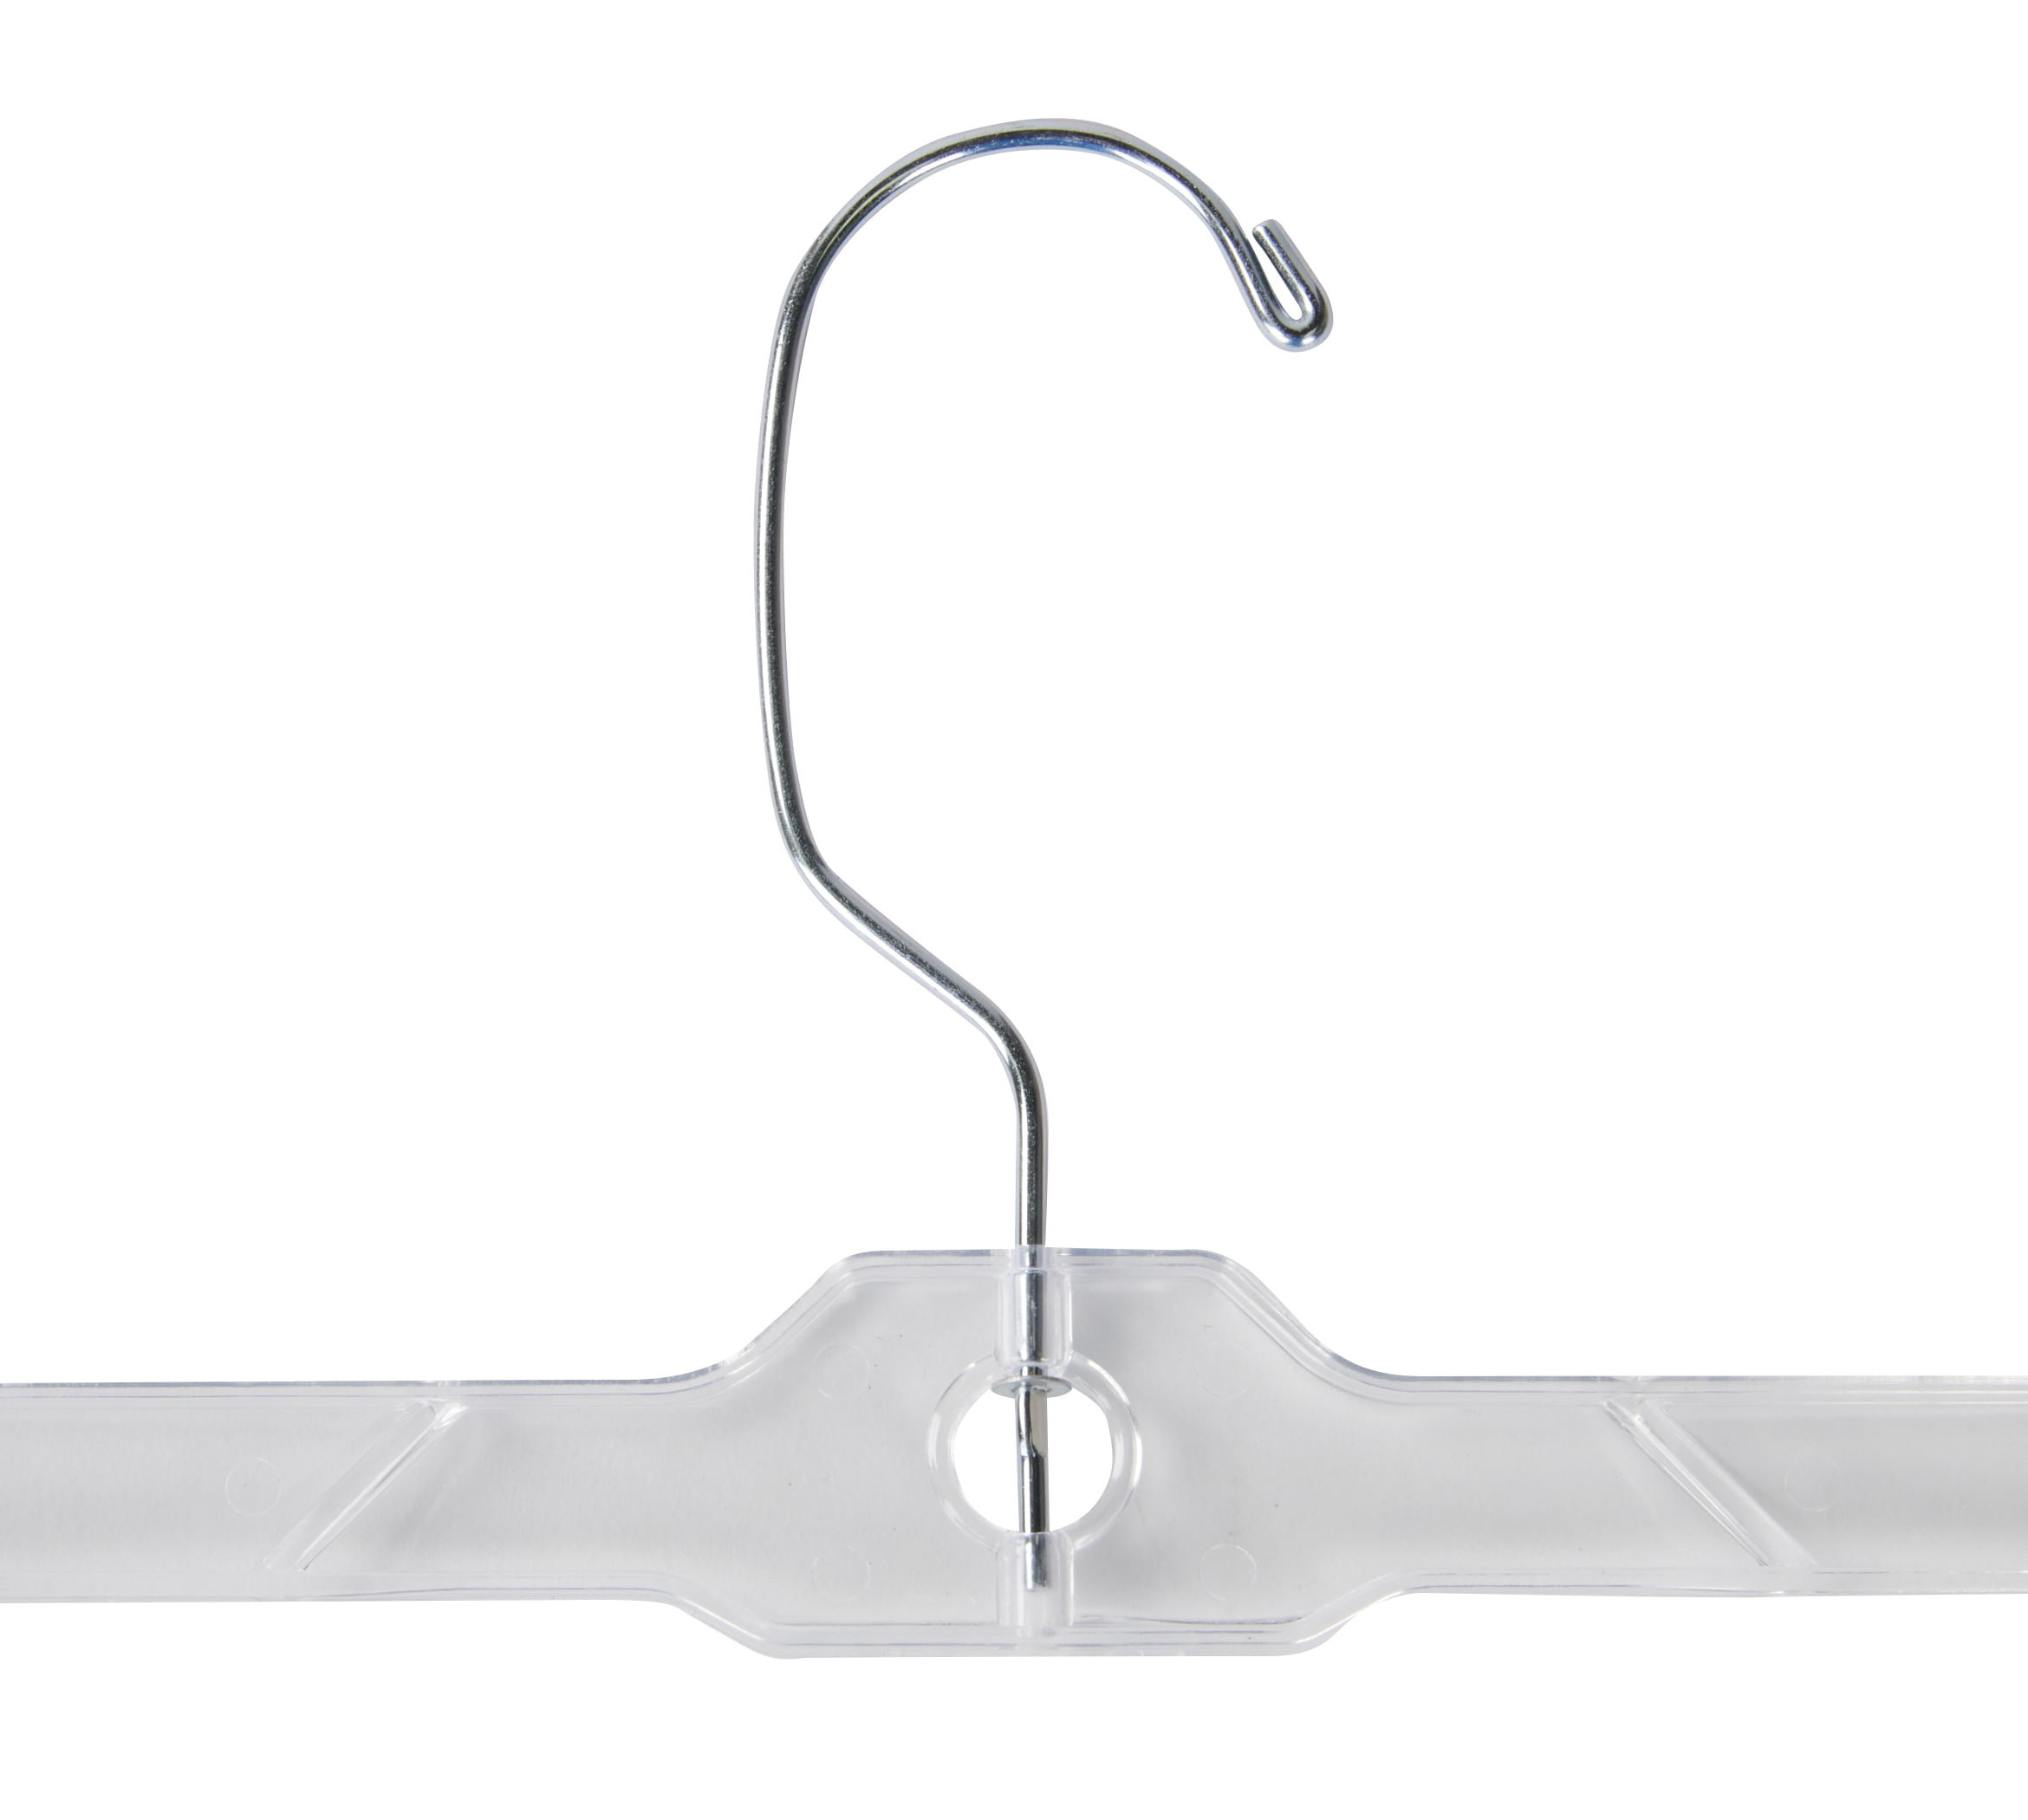 Kid's Slim Pant/Skirt Hanger Clear Pkg/3, 11 x 1-1/8 x 5-7/8 H | The Container Store